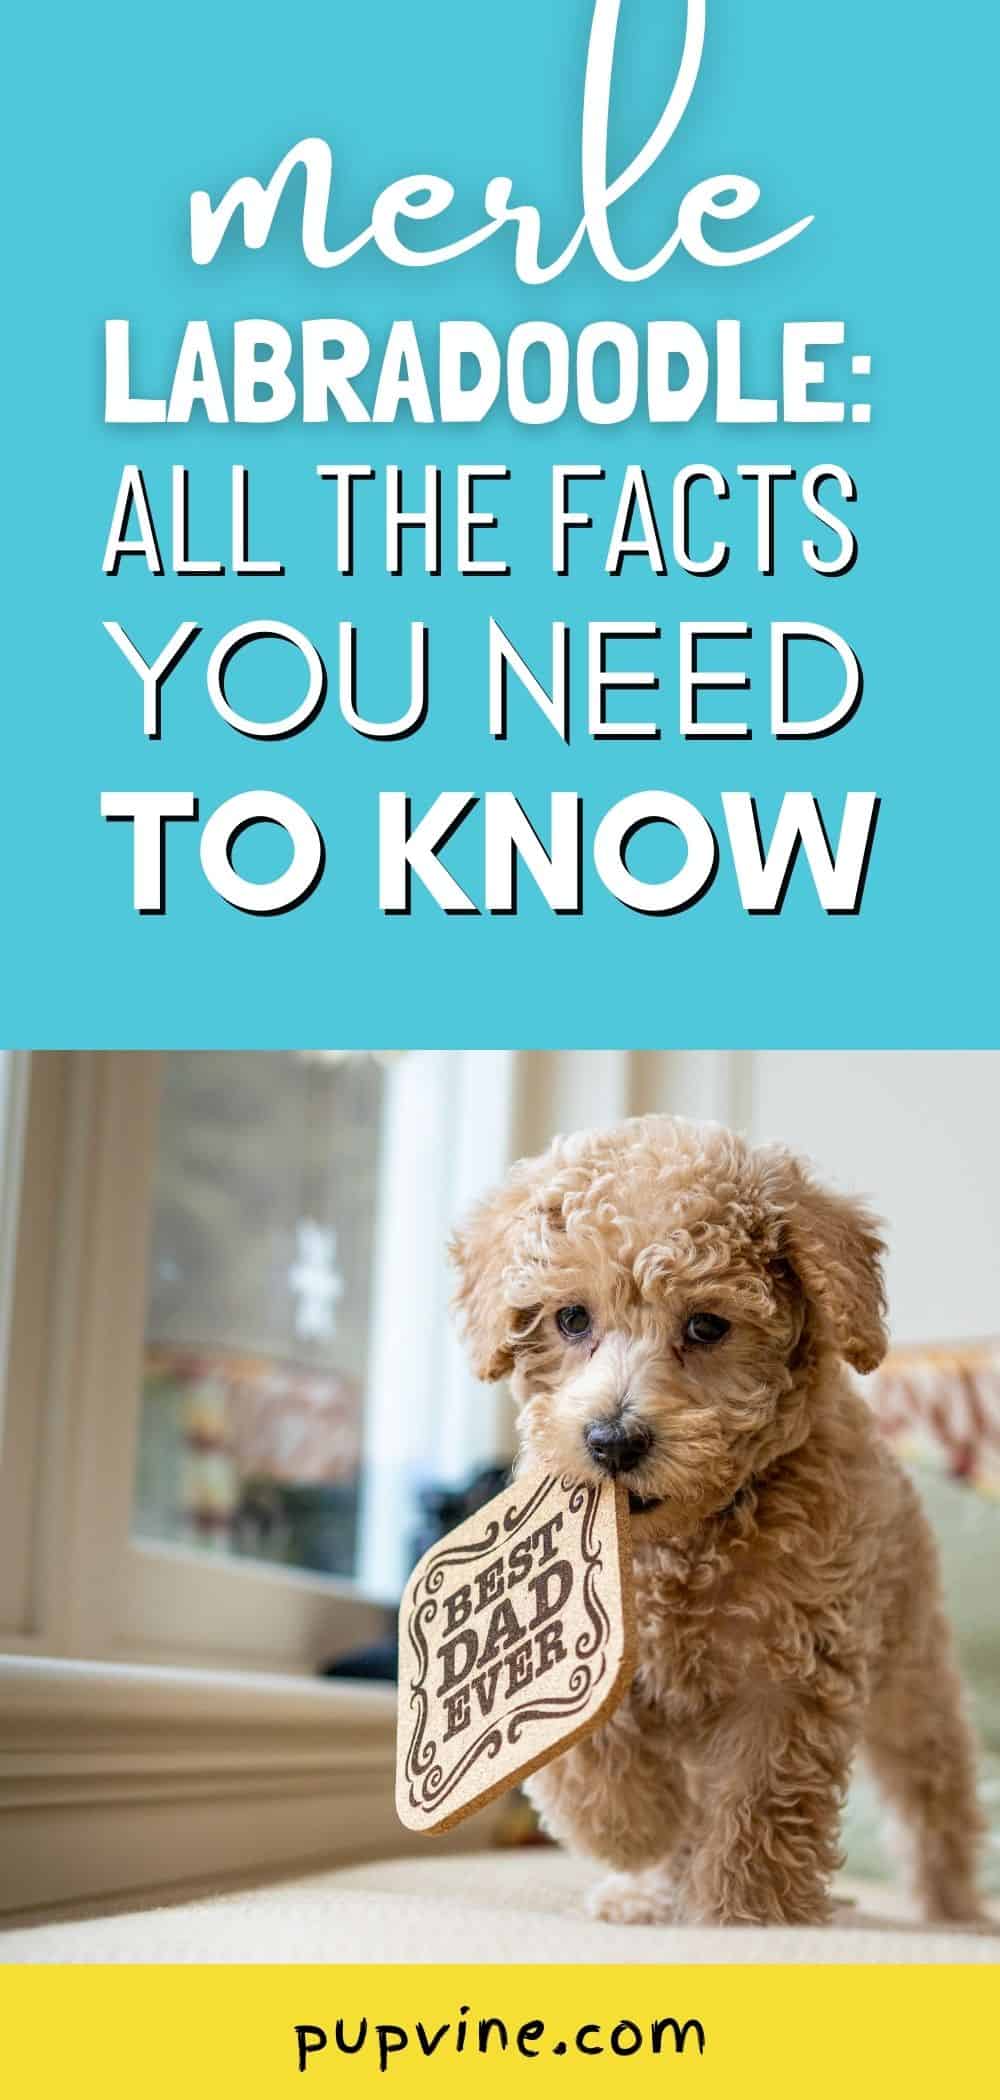 Merle Labradoodle: All The Facts You Need To Know Pinterest